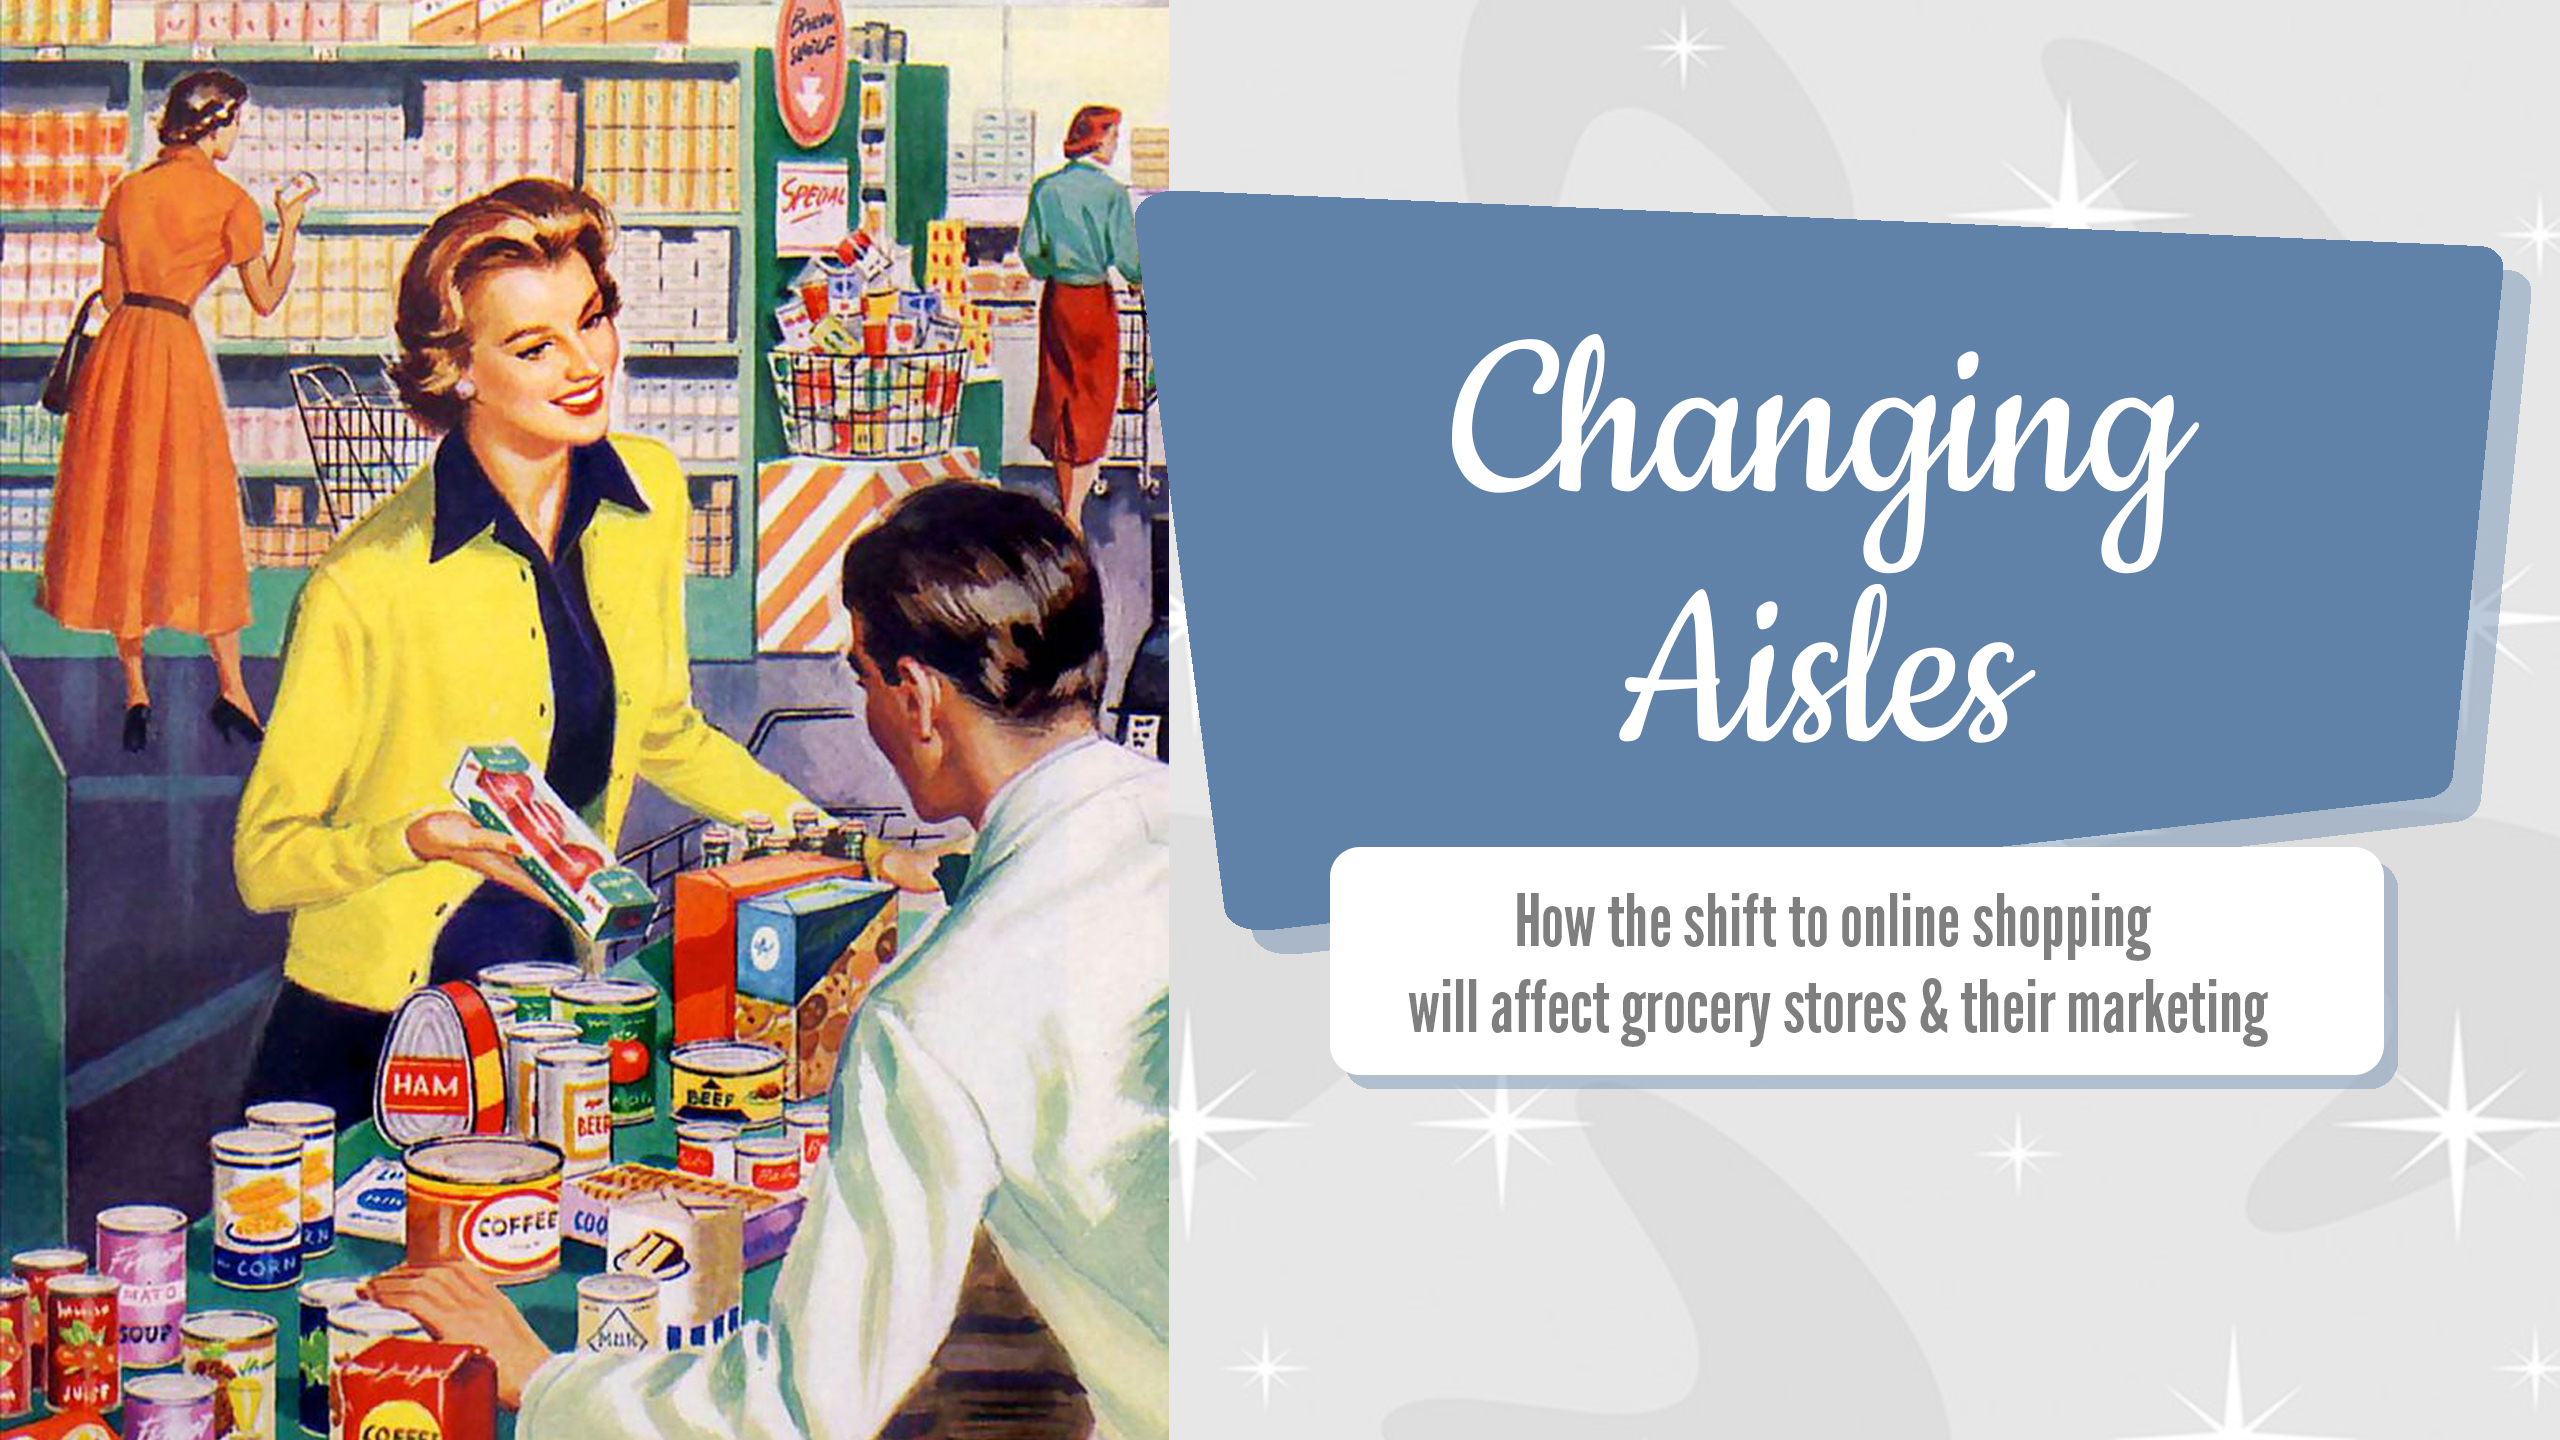 Changing Aisles: How the shift to online shopping will affect grocery stores & marketing